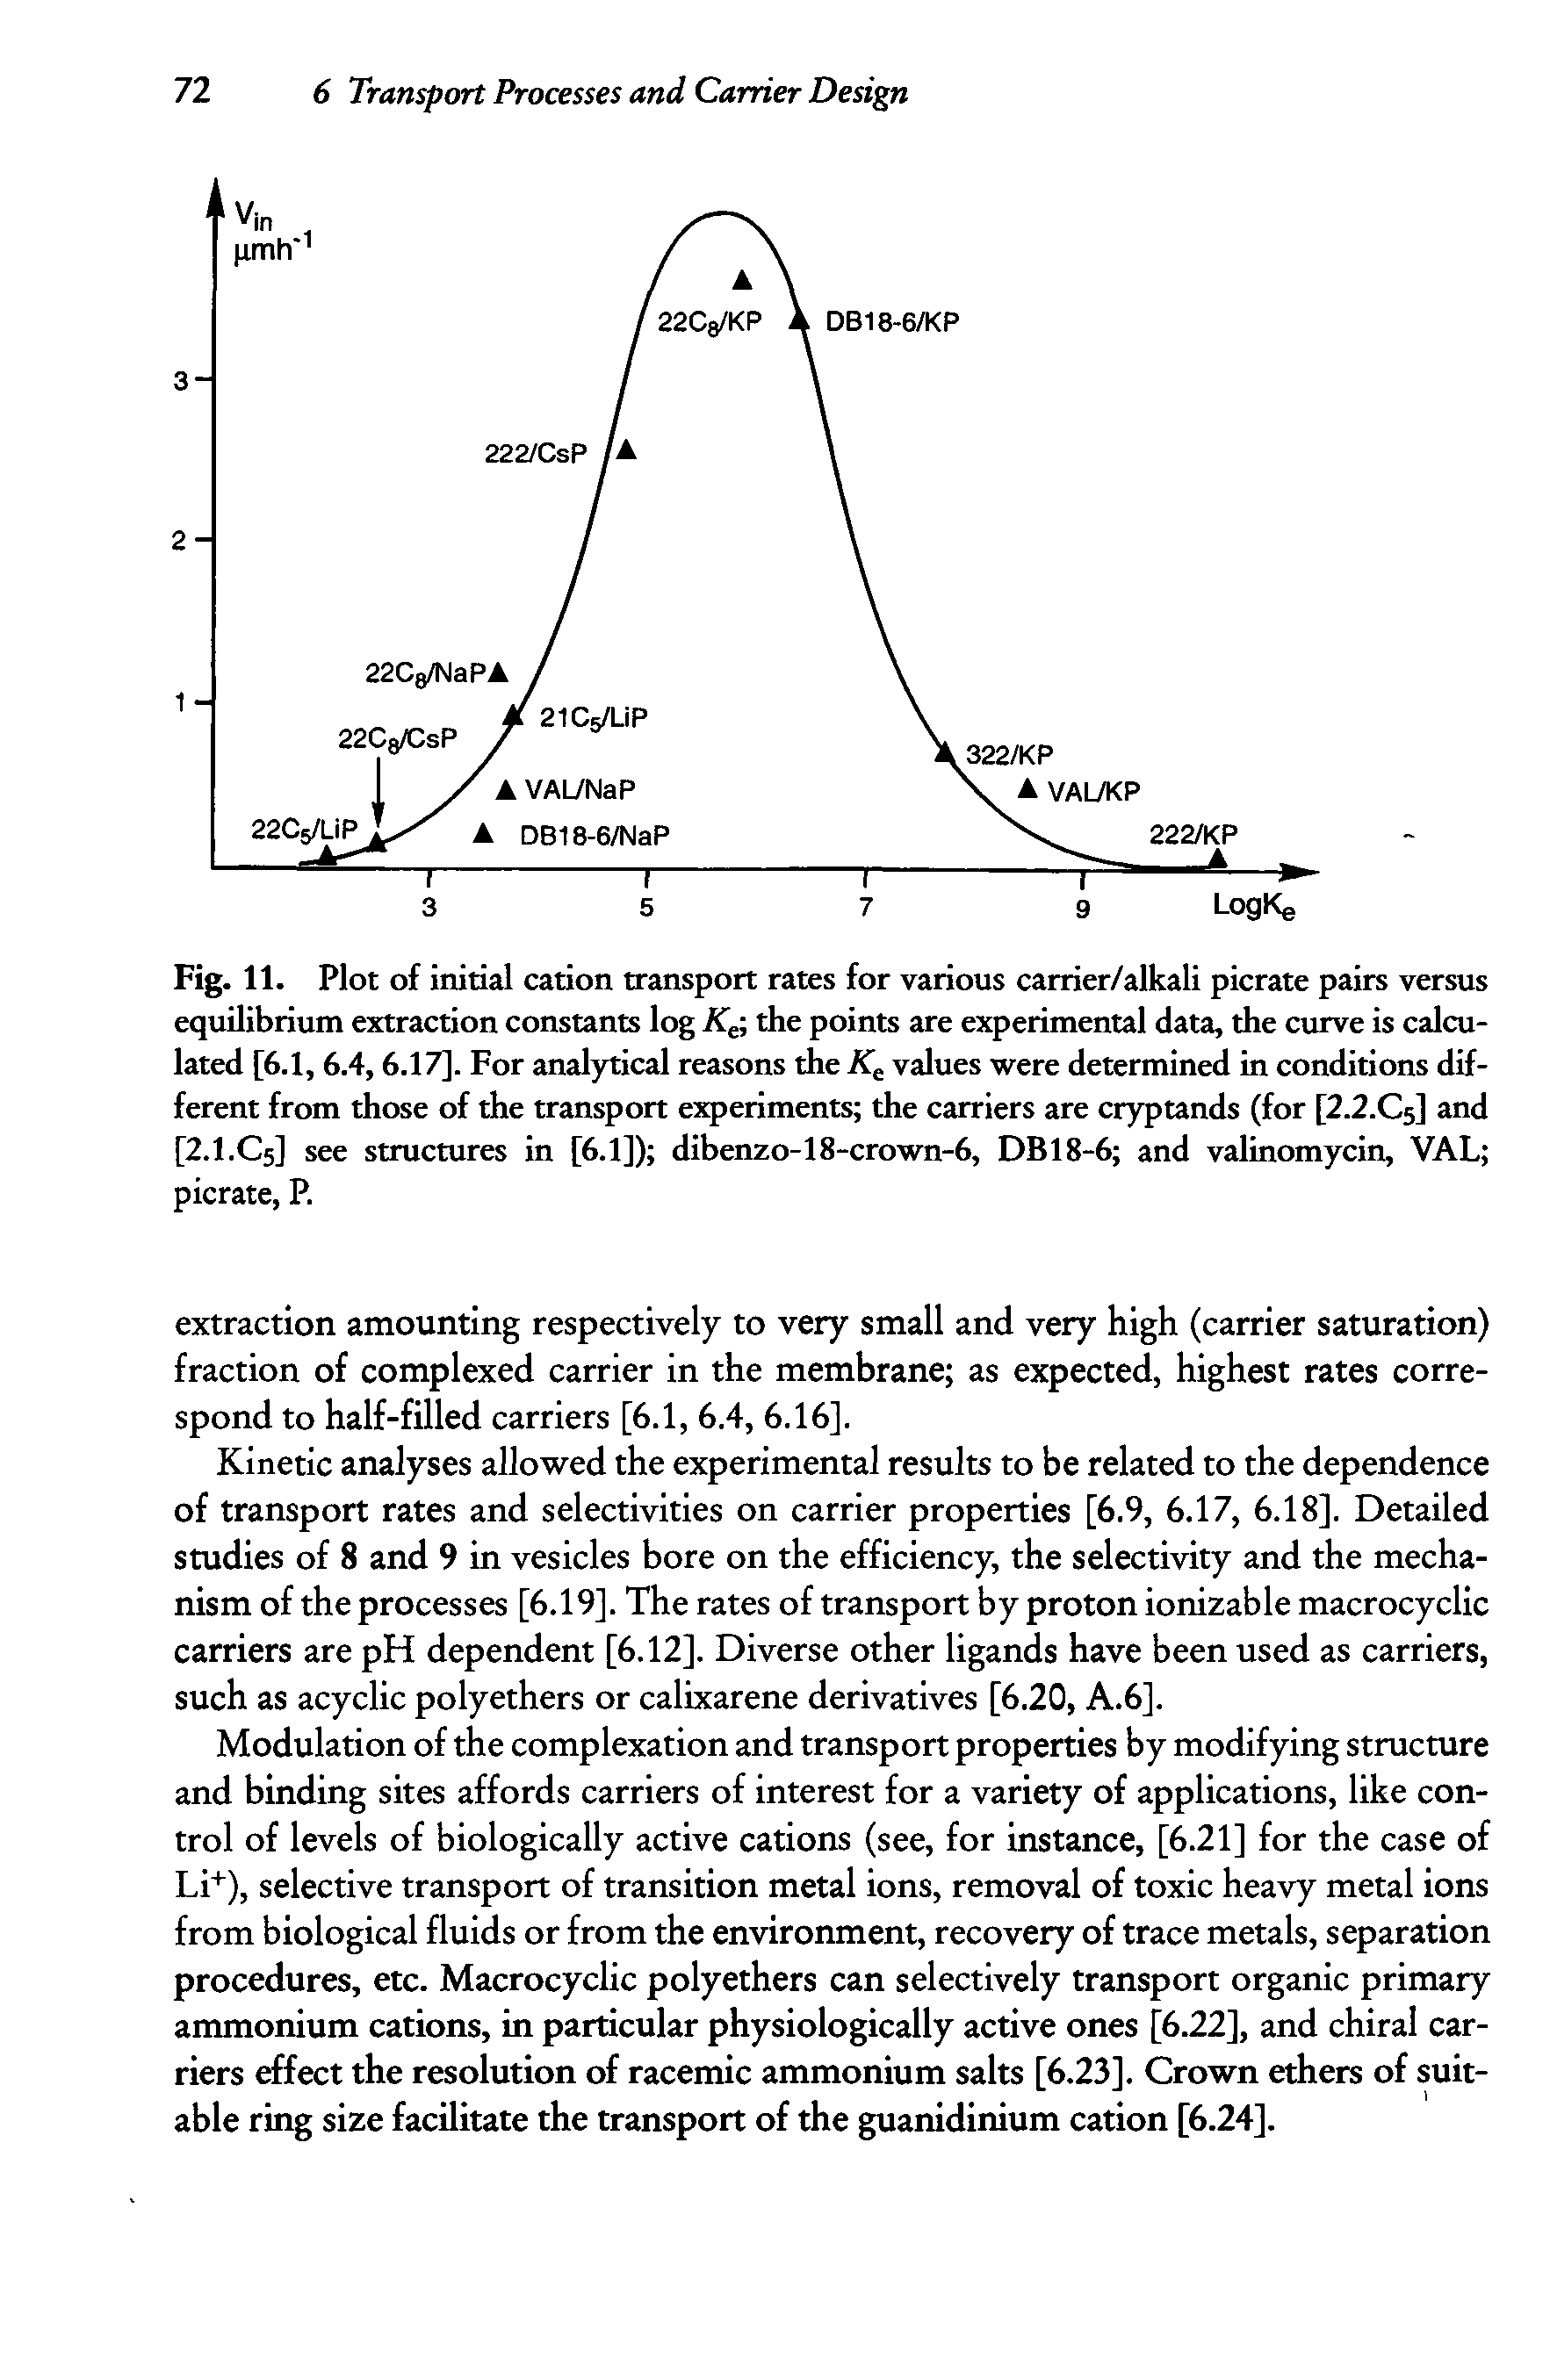 Fig. 11. Plot of initial cation transport rates for various carrier/alkali picrate pairs versus equilibrium extraction constants log Ke the points are experimental data, the curve is calculated [6.1, 6.4,6.17]. For analytical reasons the Ke values were determined in conditions different from those of the transport experiments the carriers are cryptands (for [2.2.C5] and [2.1.C5] see structures in [6.1]) dibenzo-18-crown-6, DB18-6 and valinomycin, VAL picrate, P.